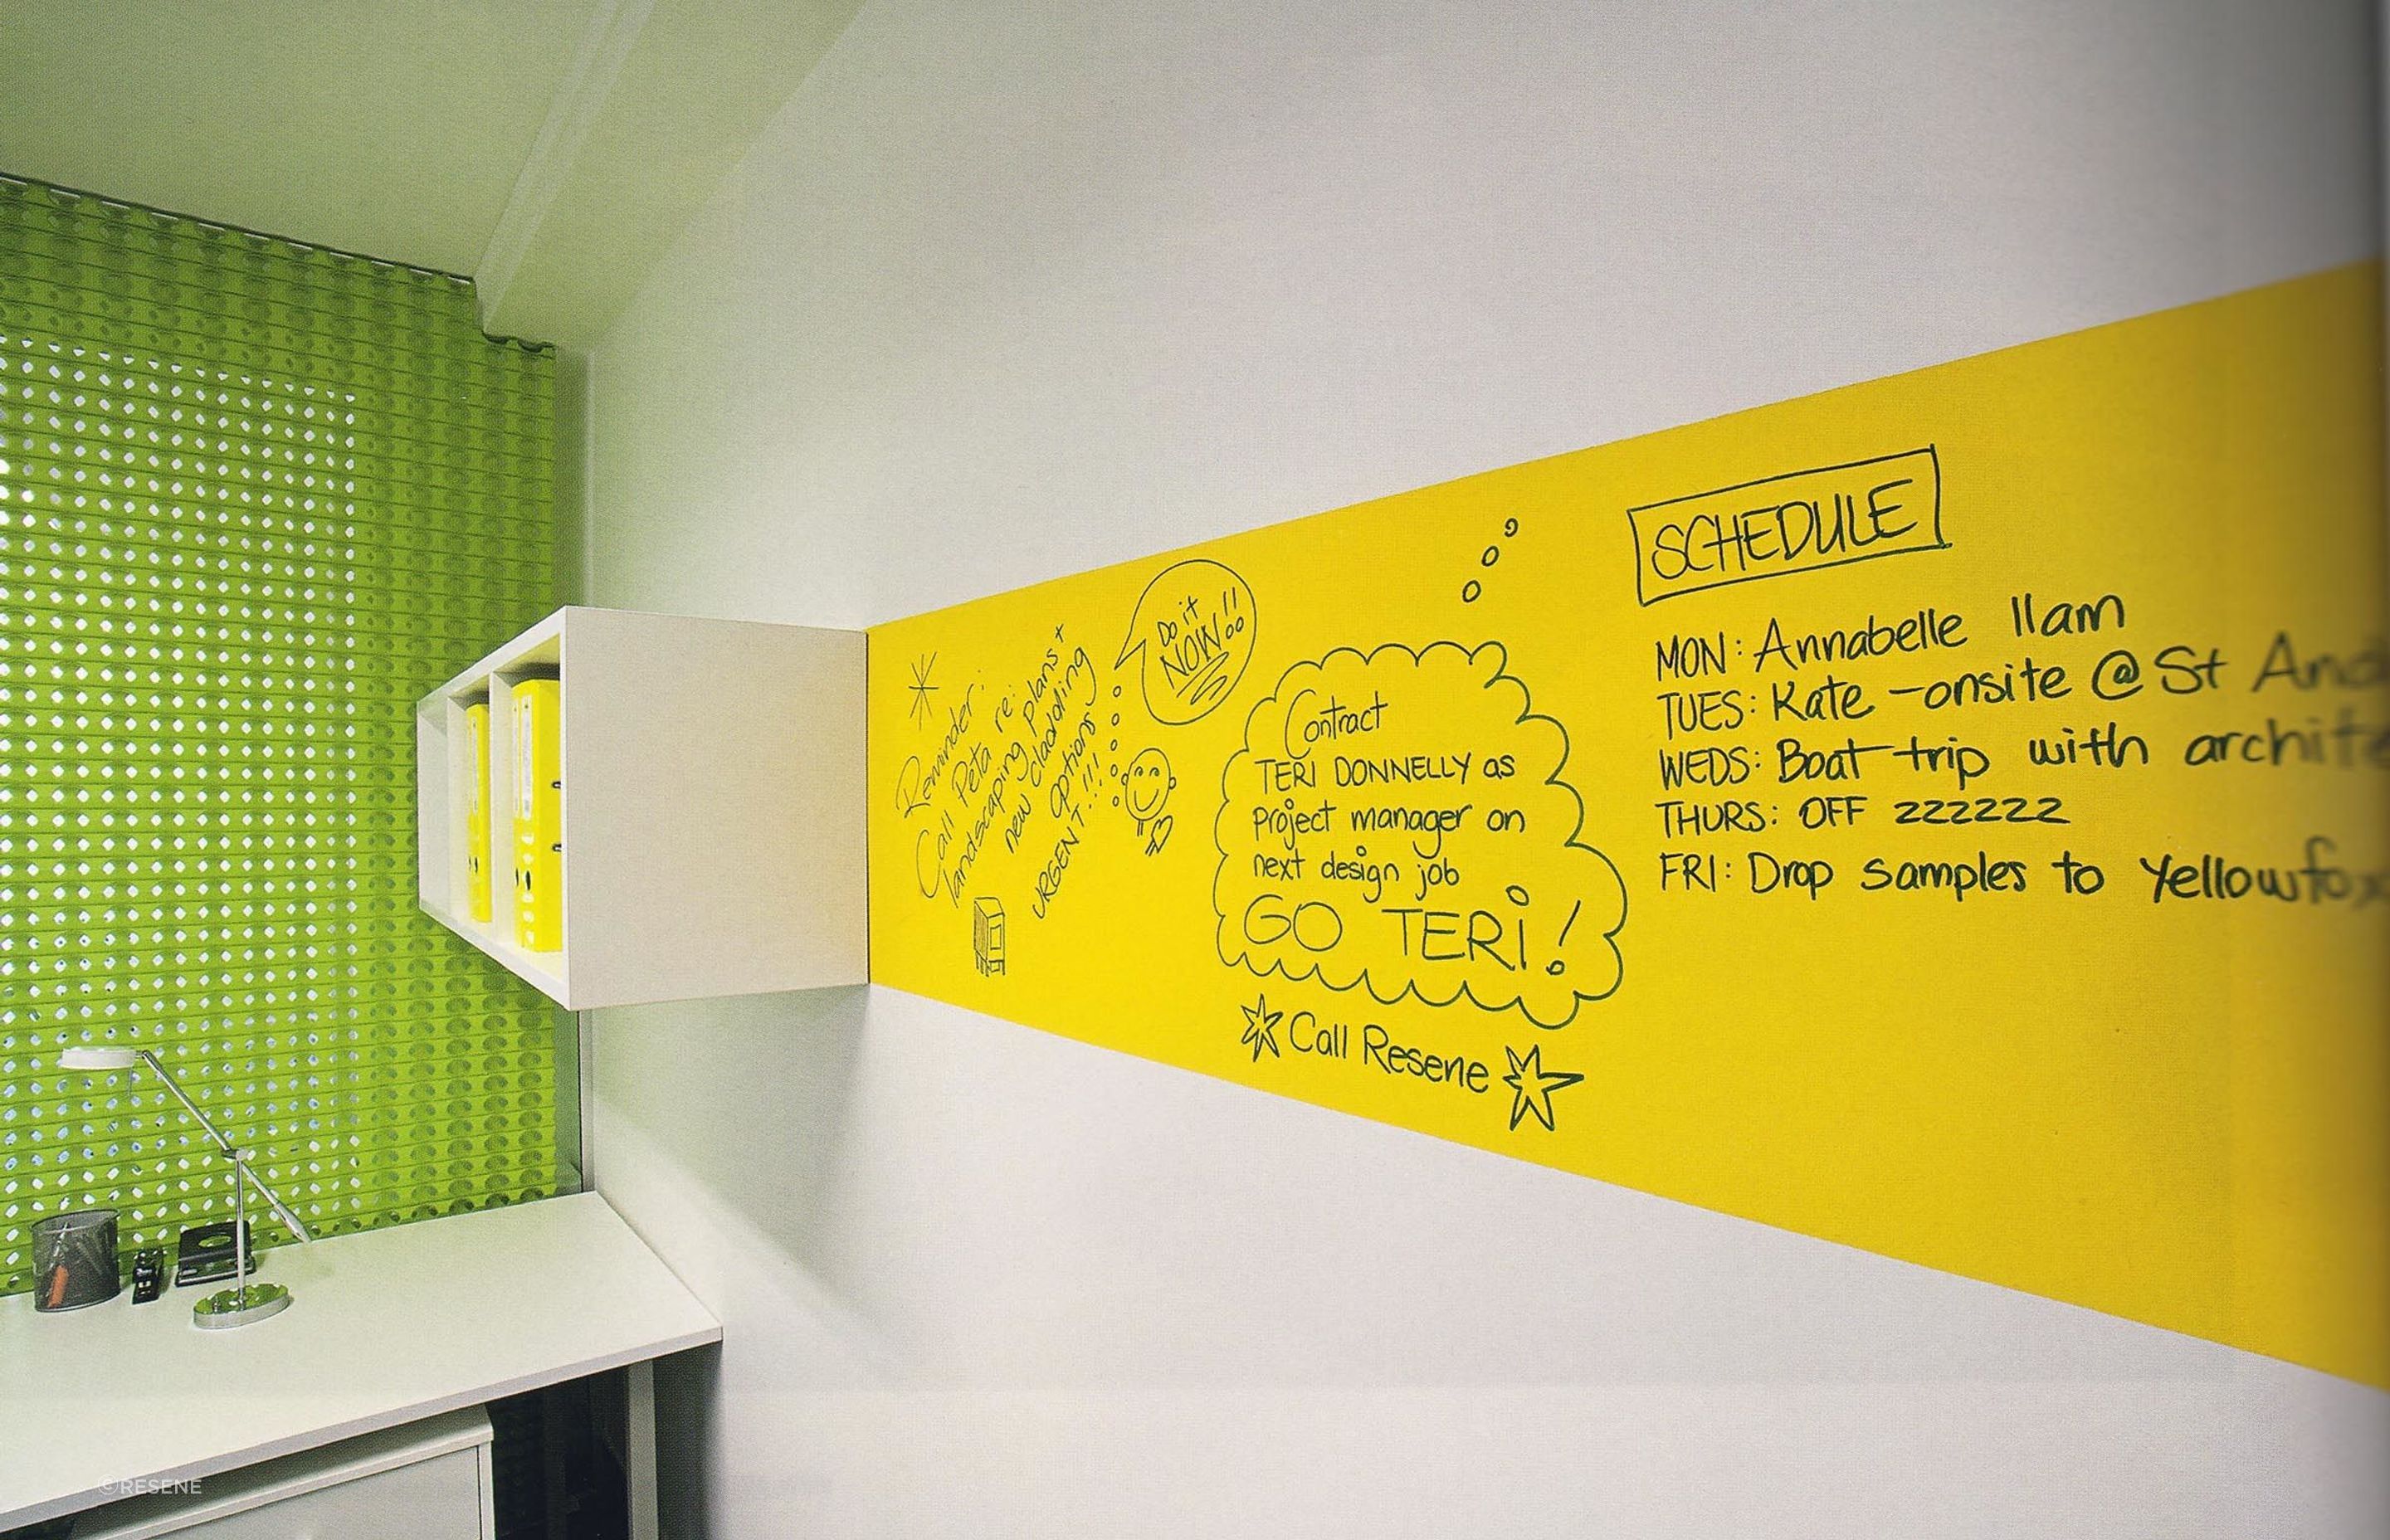 Resene's Write-on wall paint can turn any wall into a whiteboard.